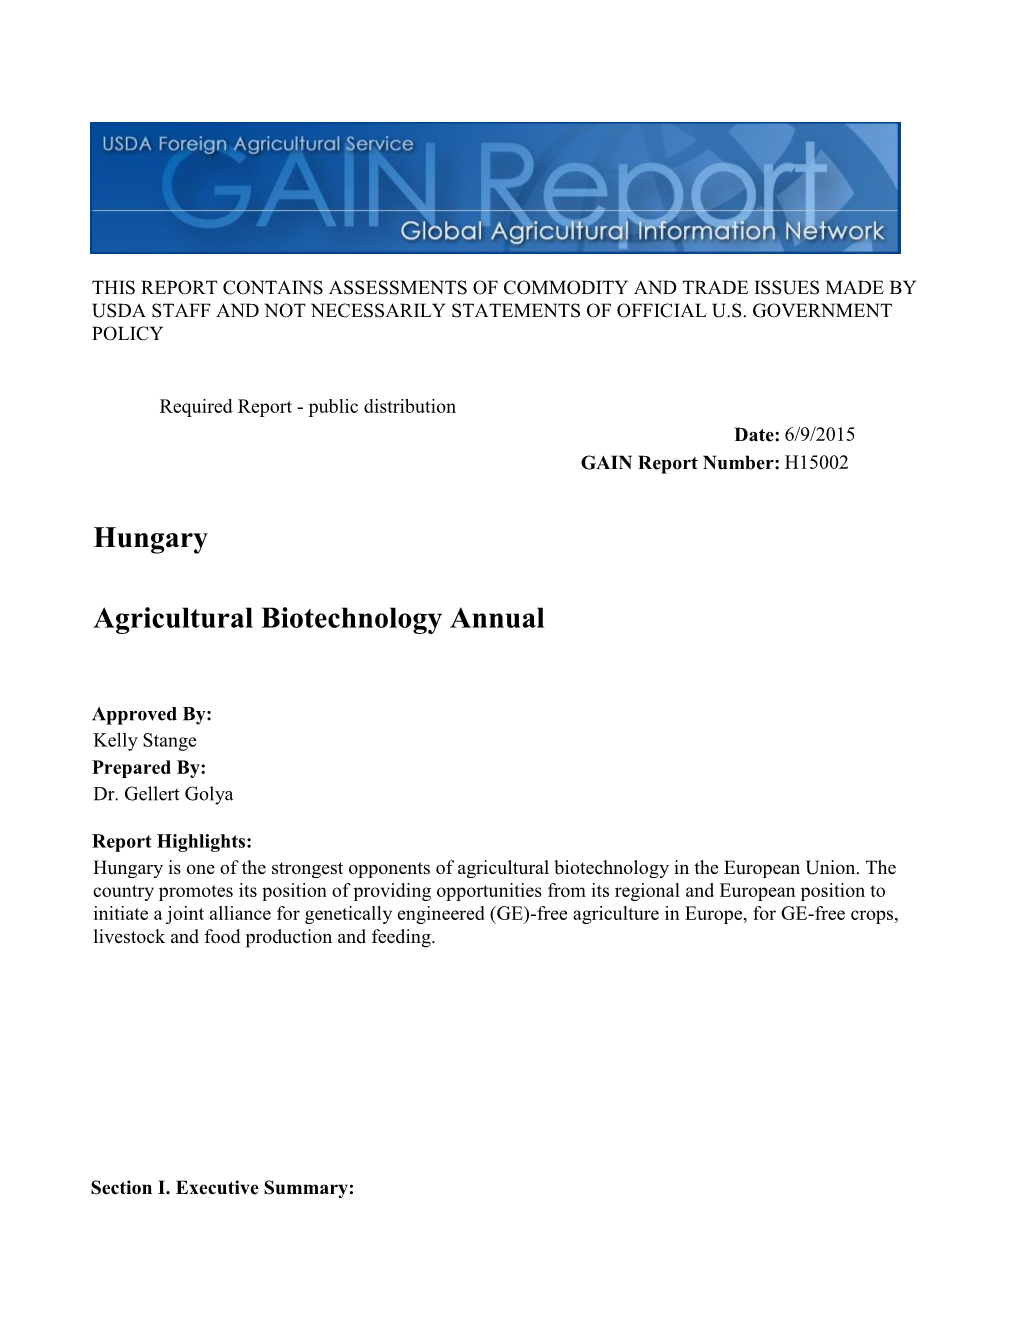 Agricultural Biotechnology Annual Hungary